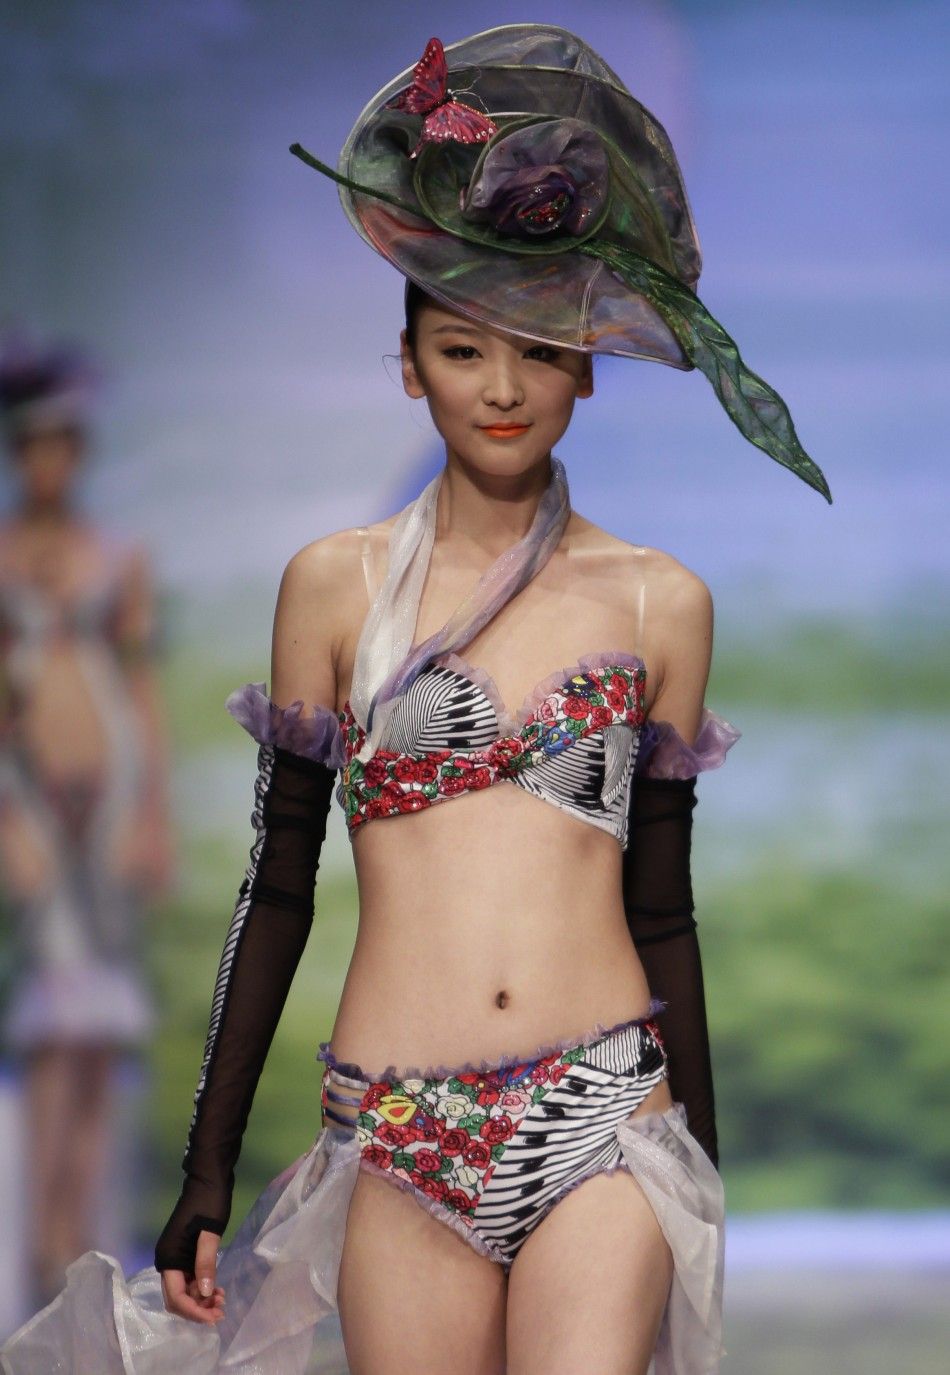 A model presents a creation for the quotOrdifen Cup,quot a lingerie design contest, during China Fashion Week for SpringSummer 2012 in Beijing October 26, 2011